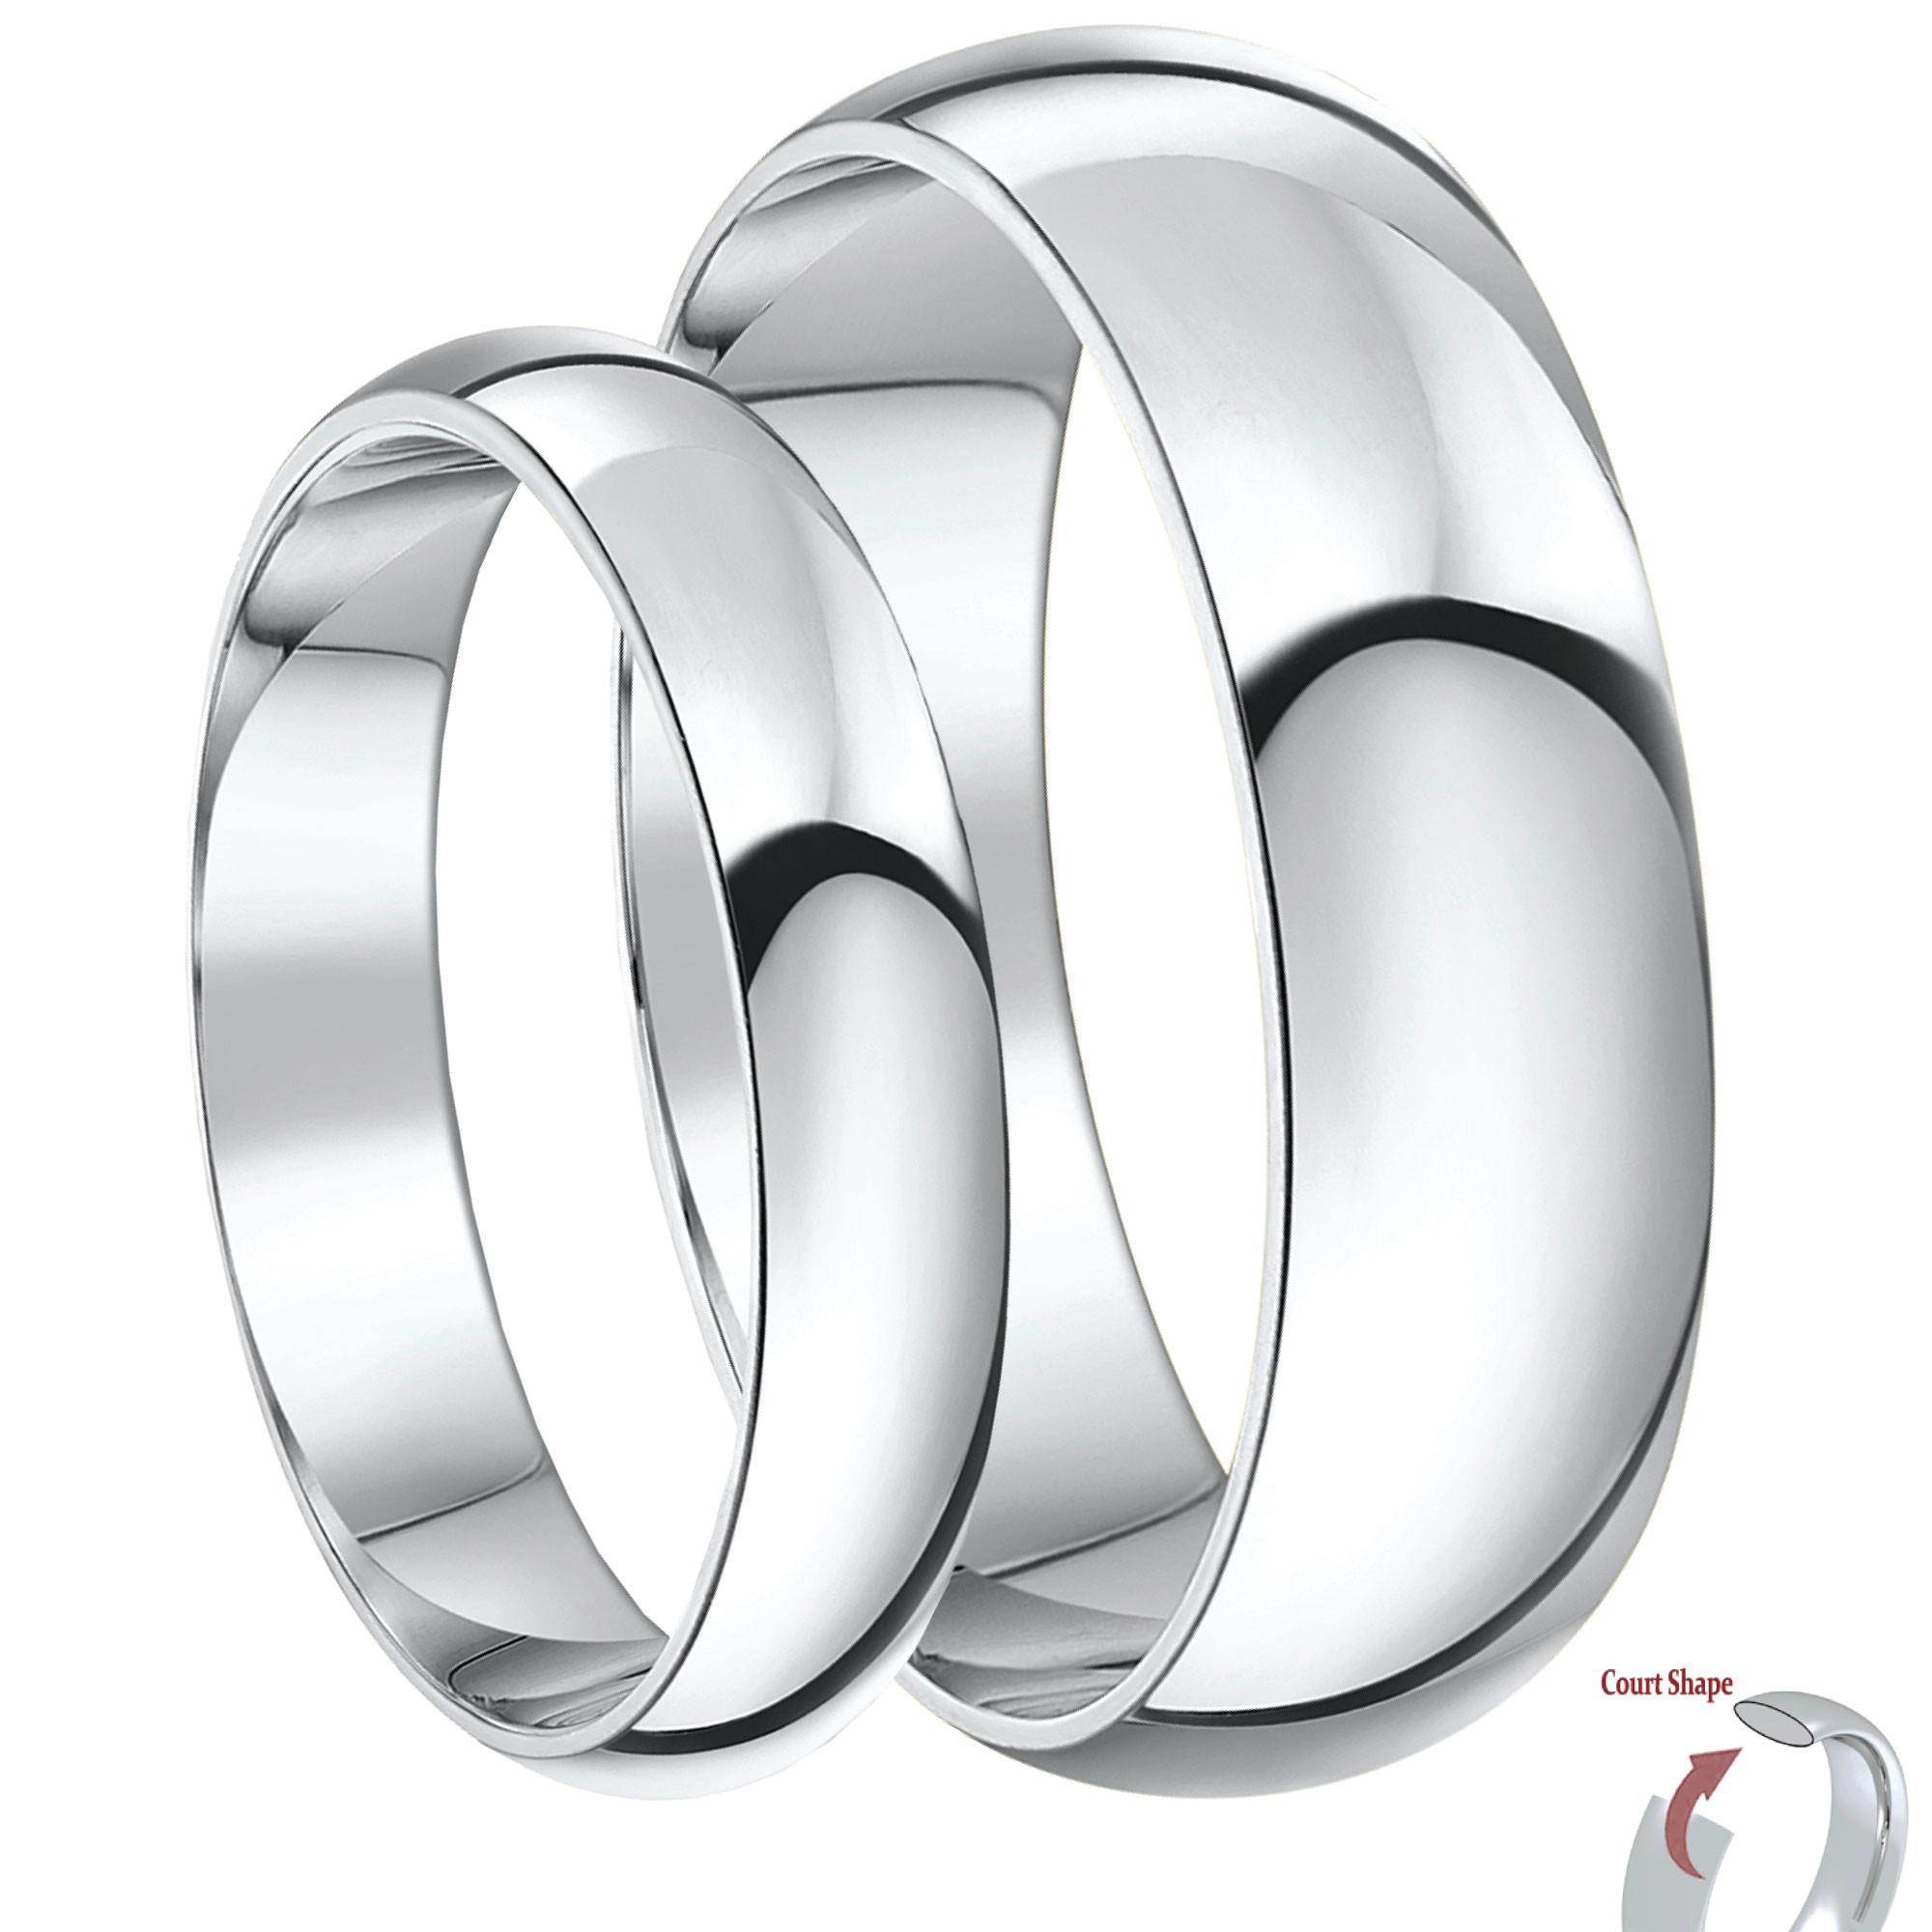 Silver Wedding Rings For Him
 Matching Silver Wedding Ring Sets for Him and Her